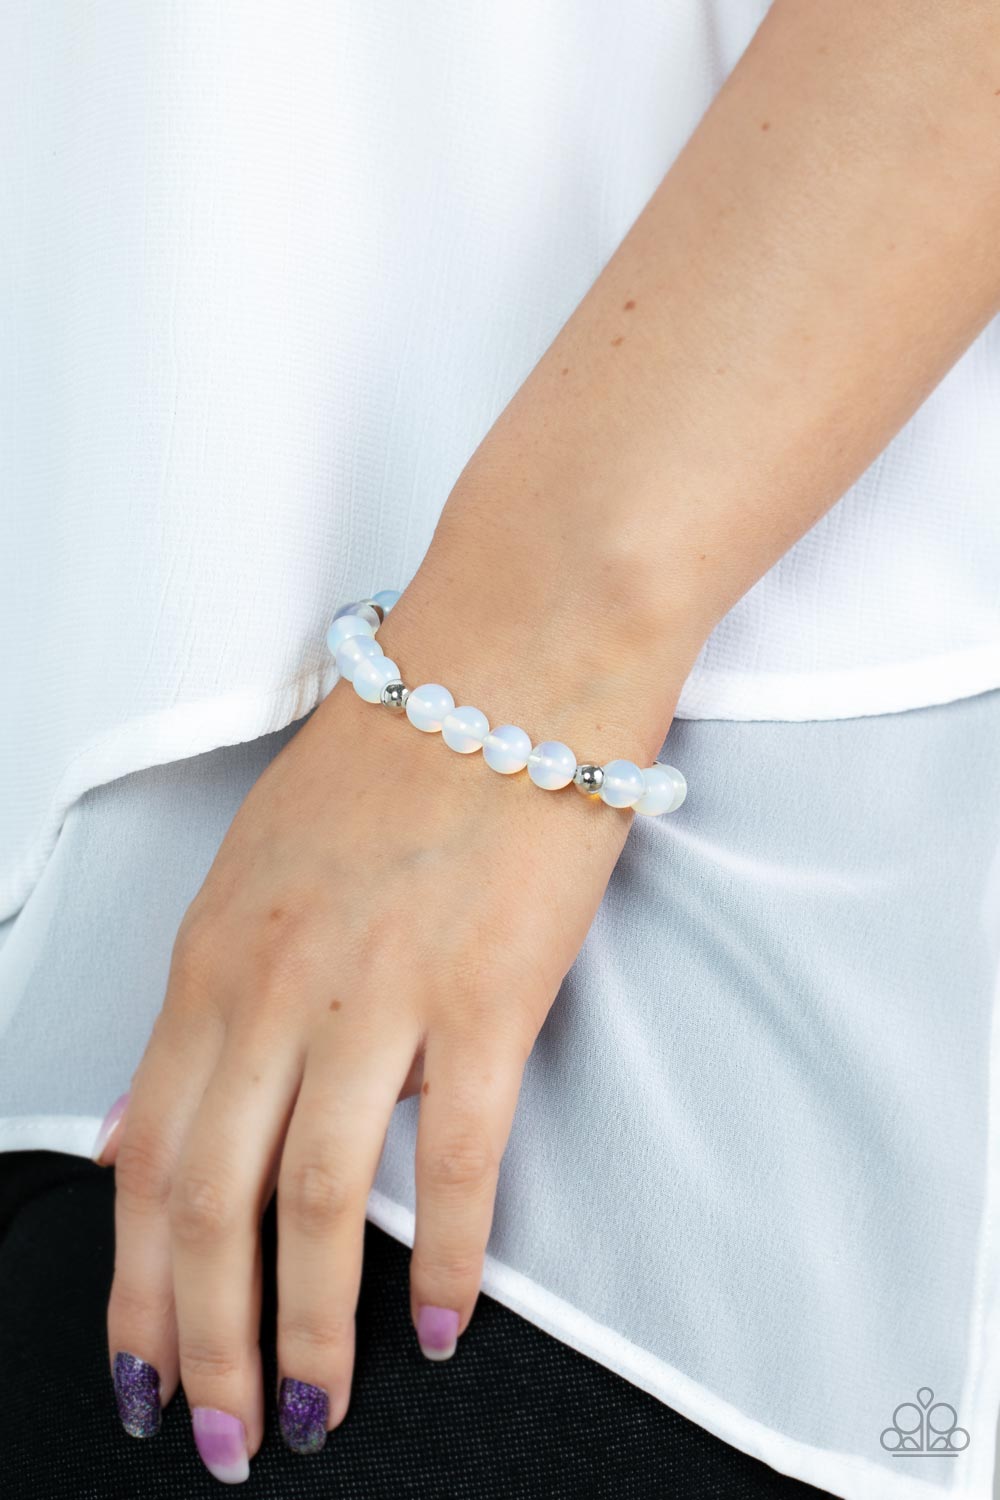 Forever and a DAYDREAM - White Paparazzi Urban Bracelet